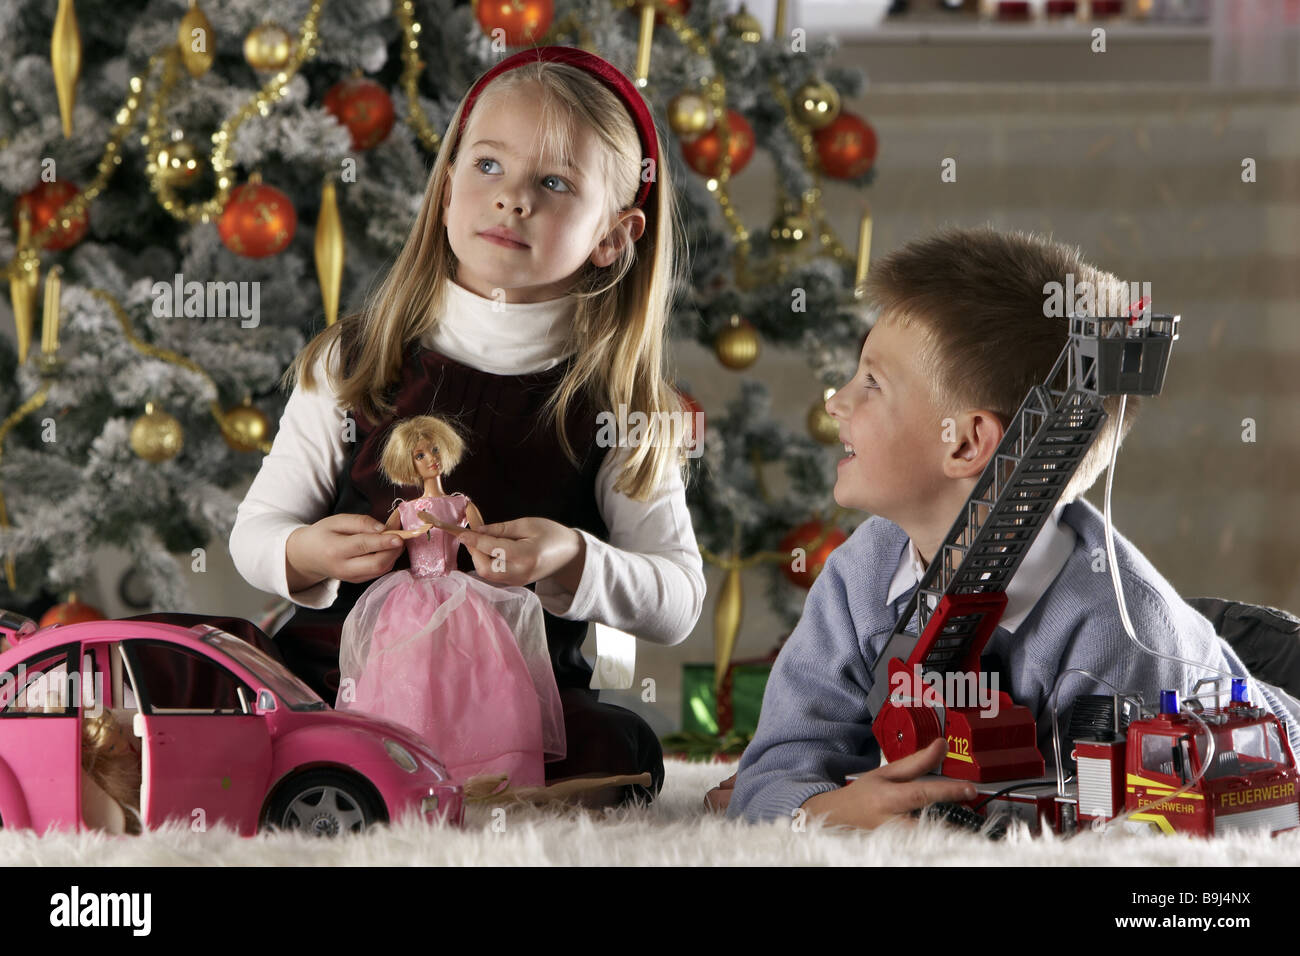 Christmas siblings toy plays semi-portrait people children 5-7 years two girl boy smiling  happily child-portrait childhood Stock Photo